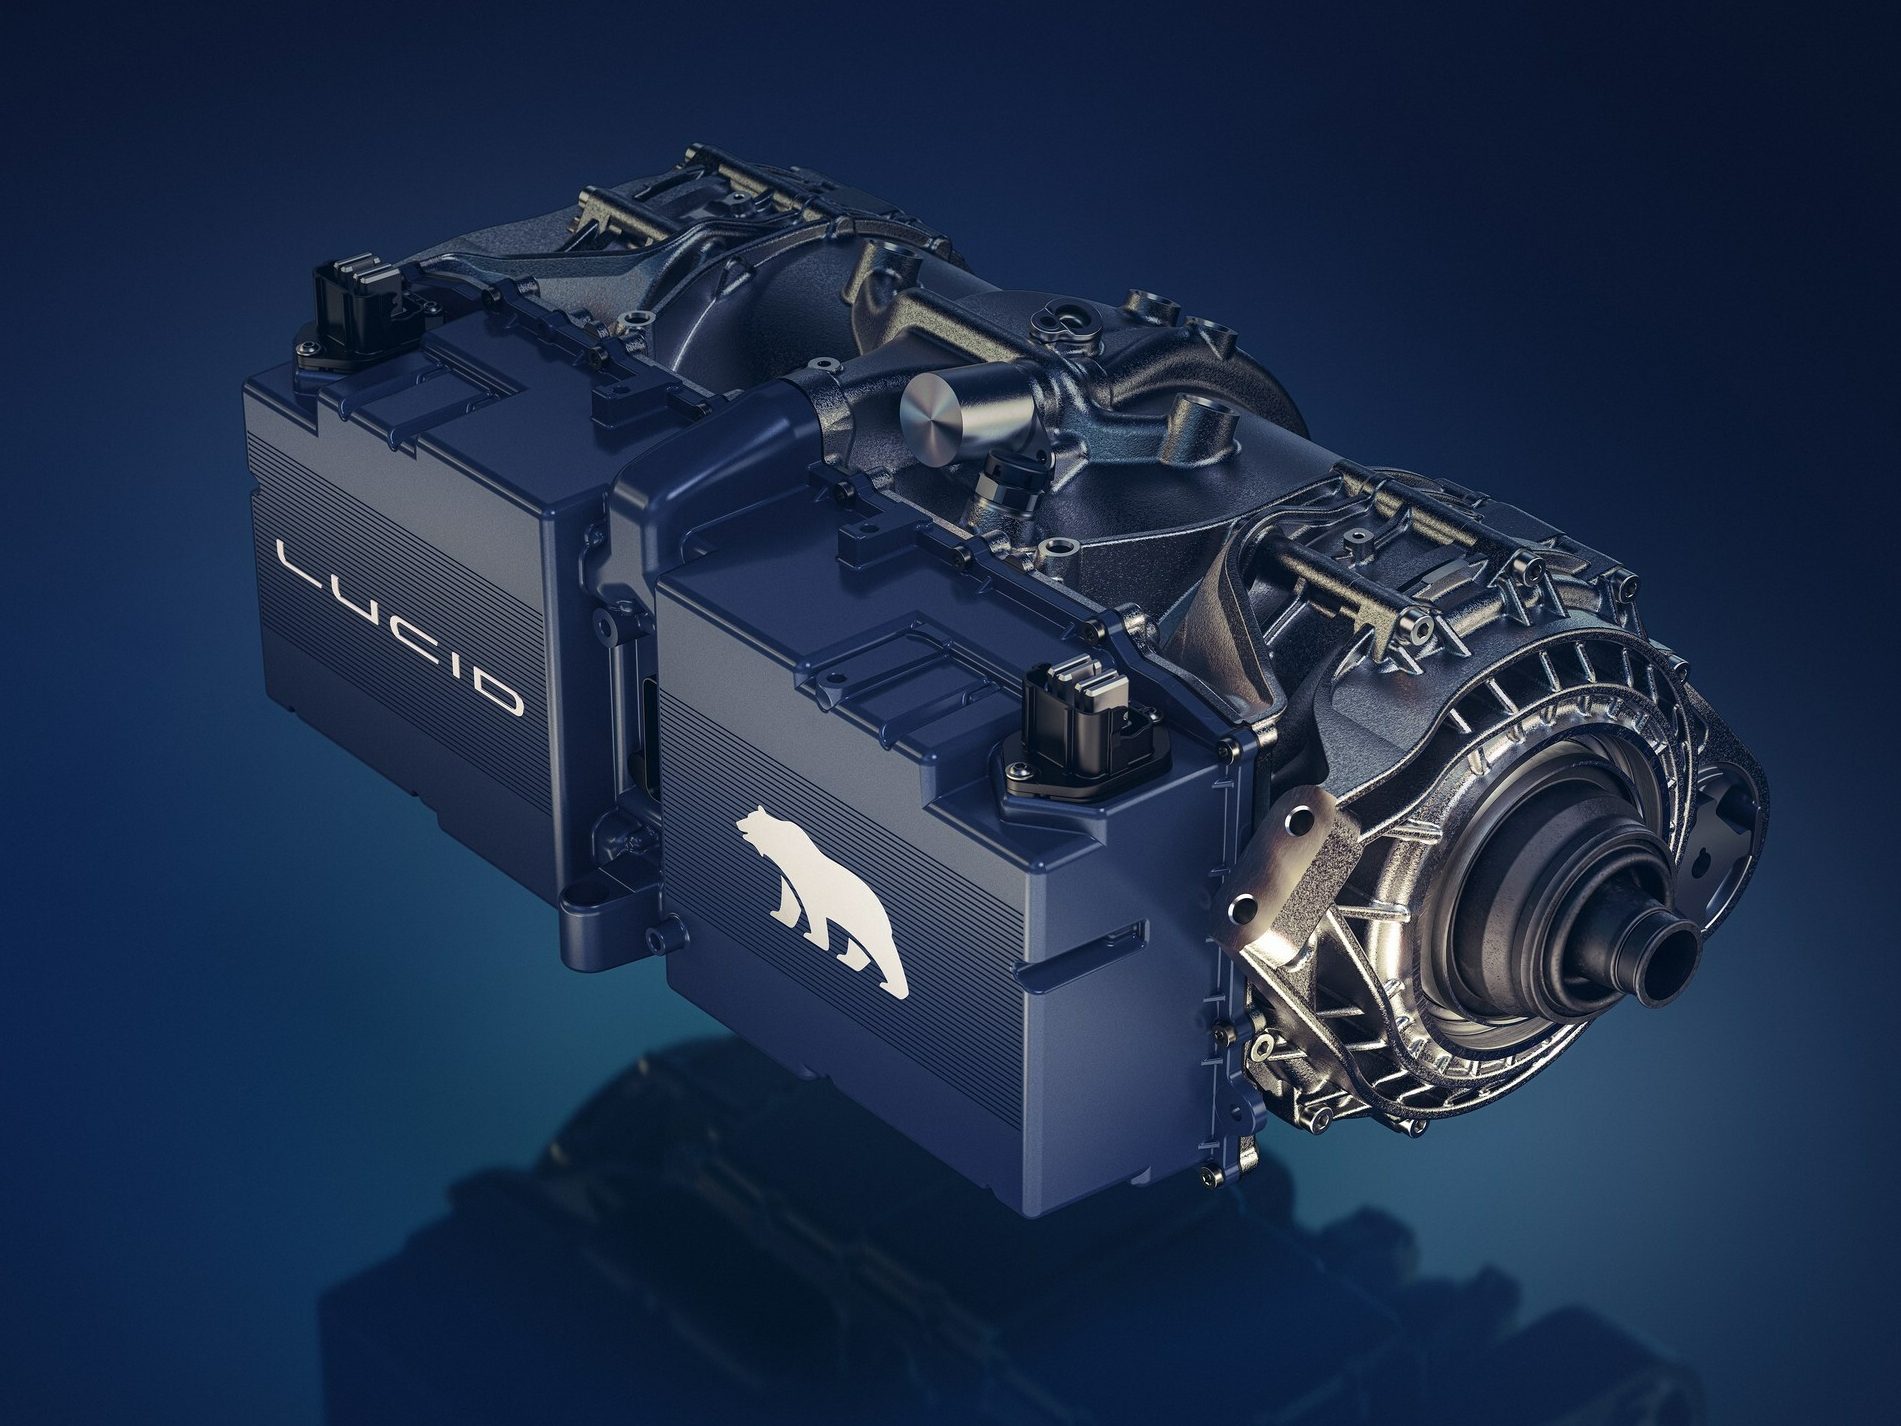 Lucid’s ultra-high performance twin motor drive unit